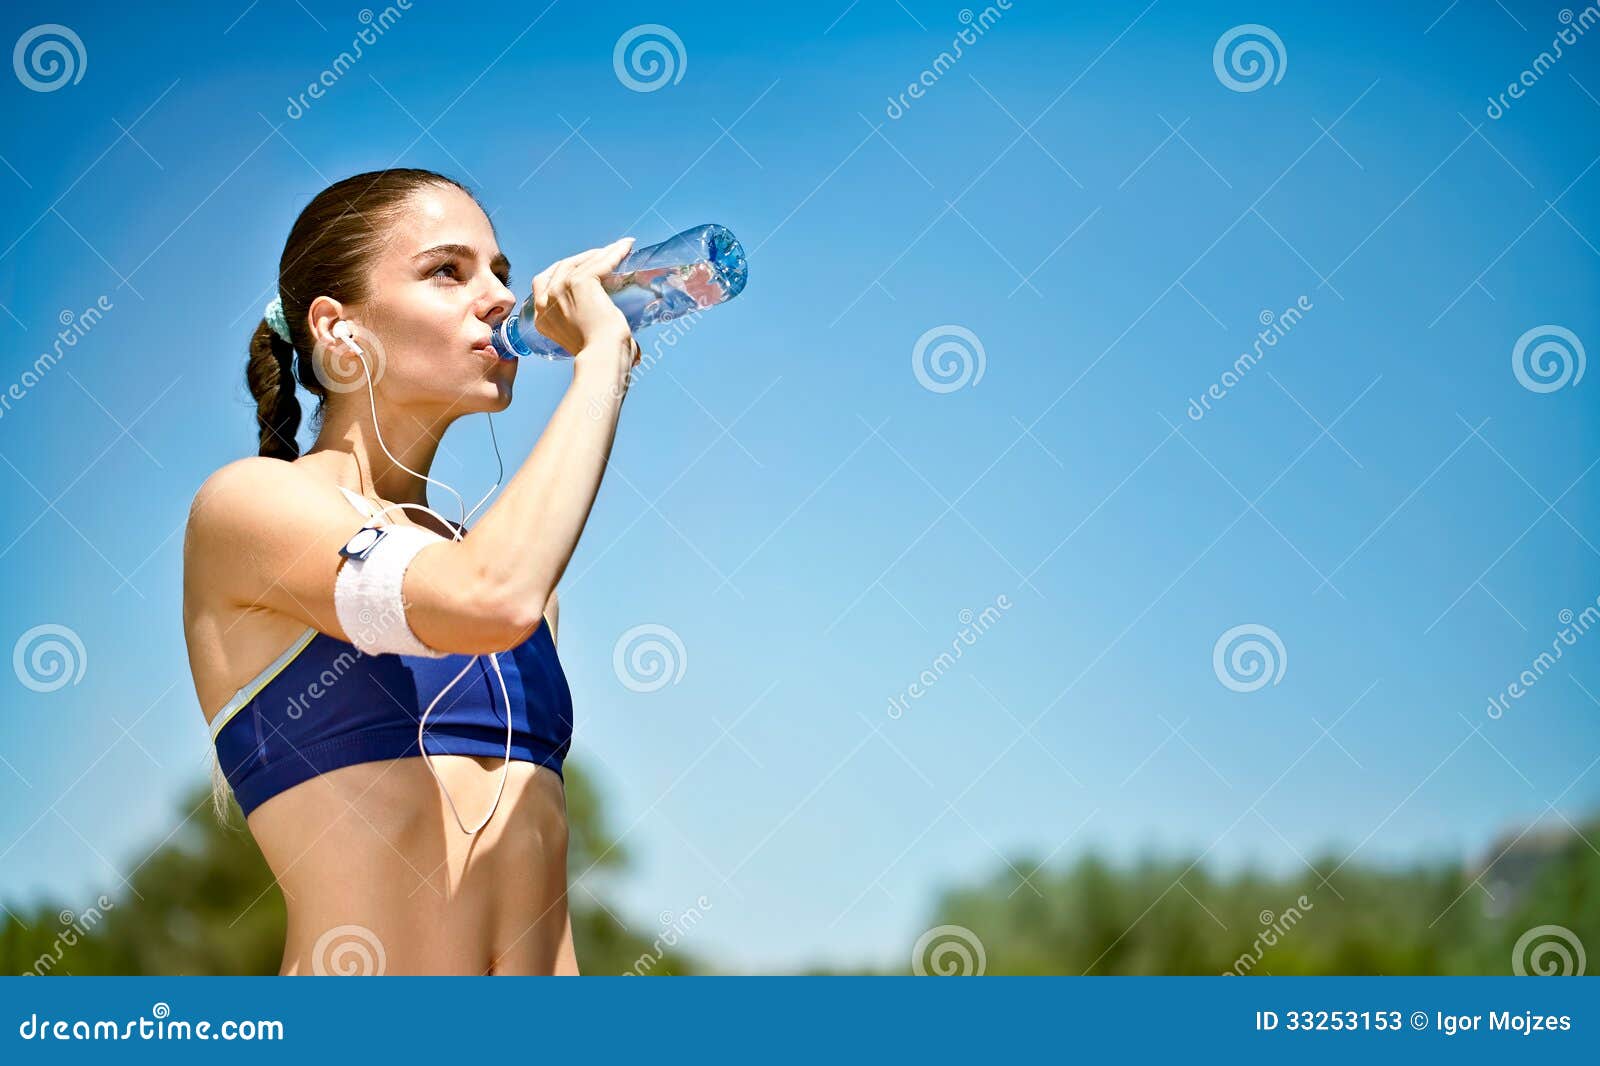 woman drinking water after sport activities